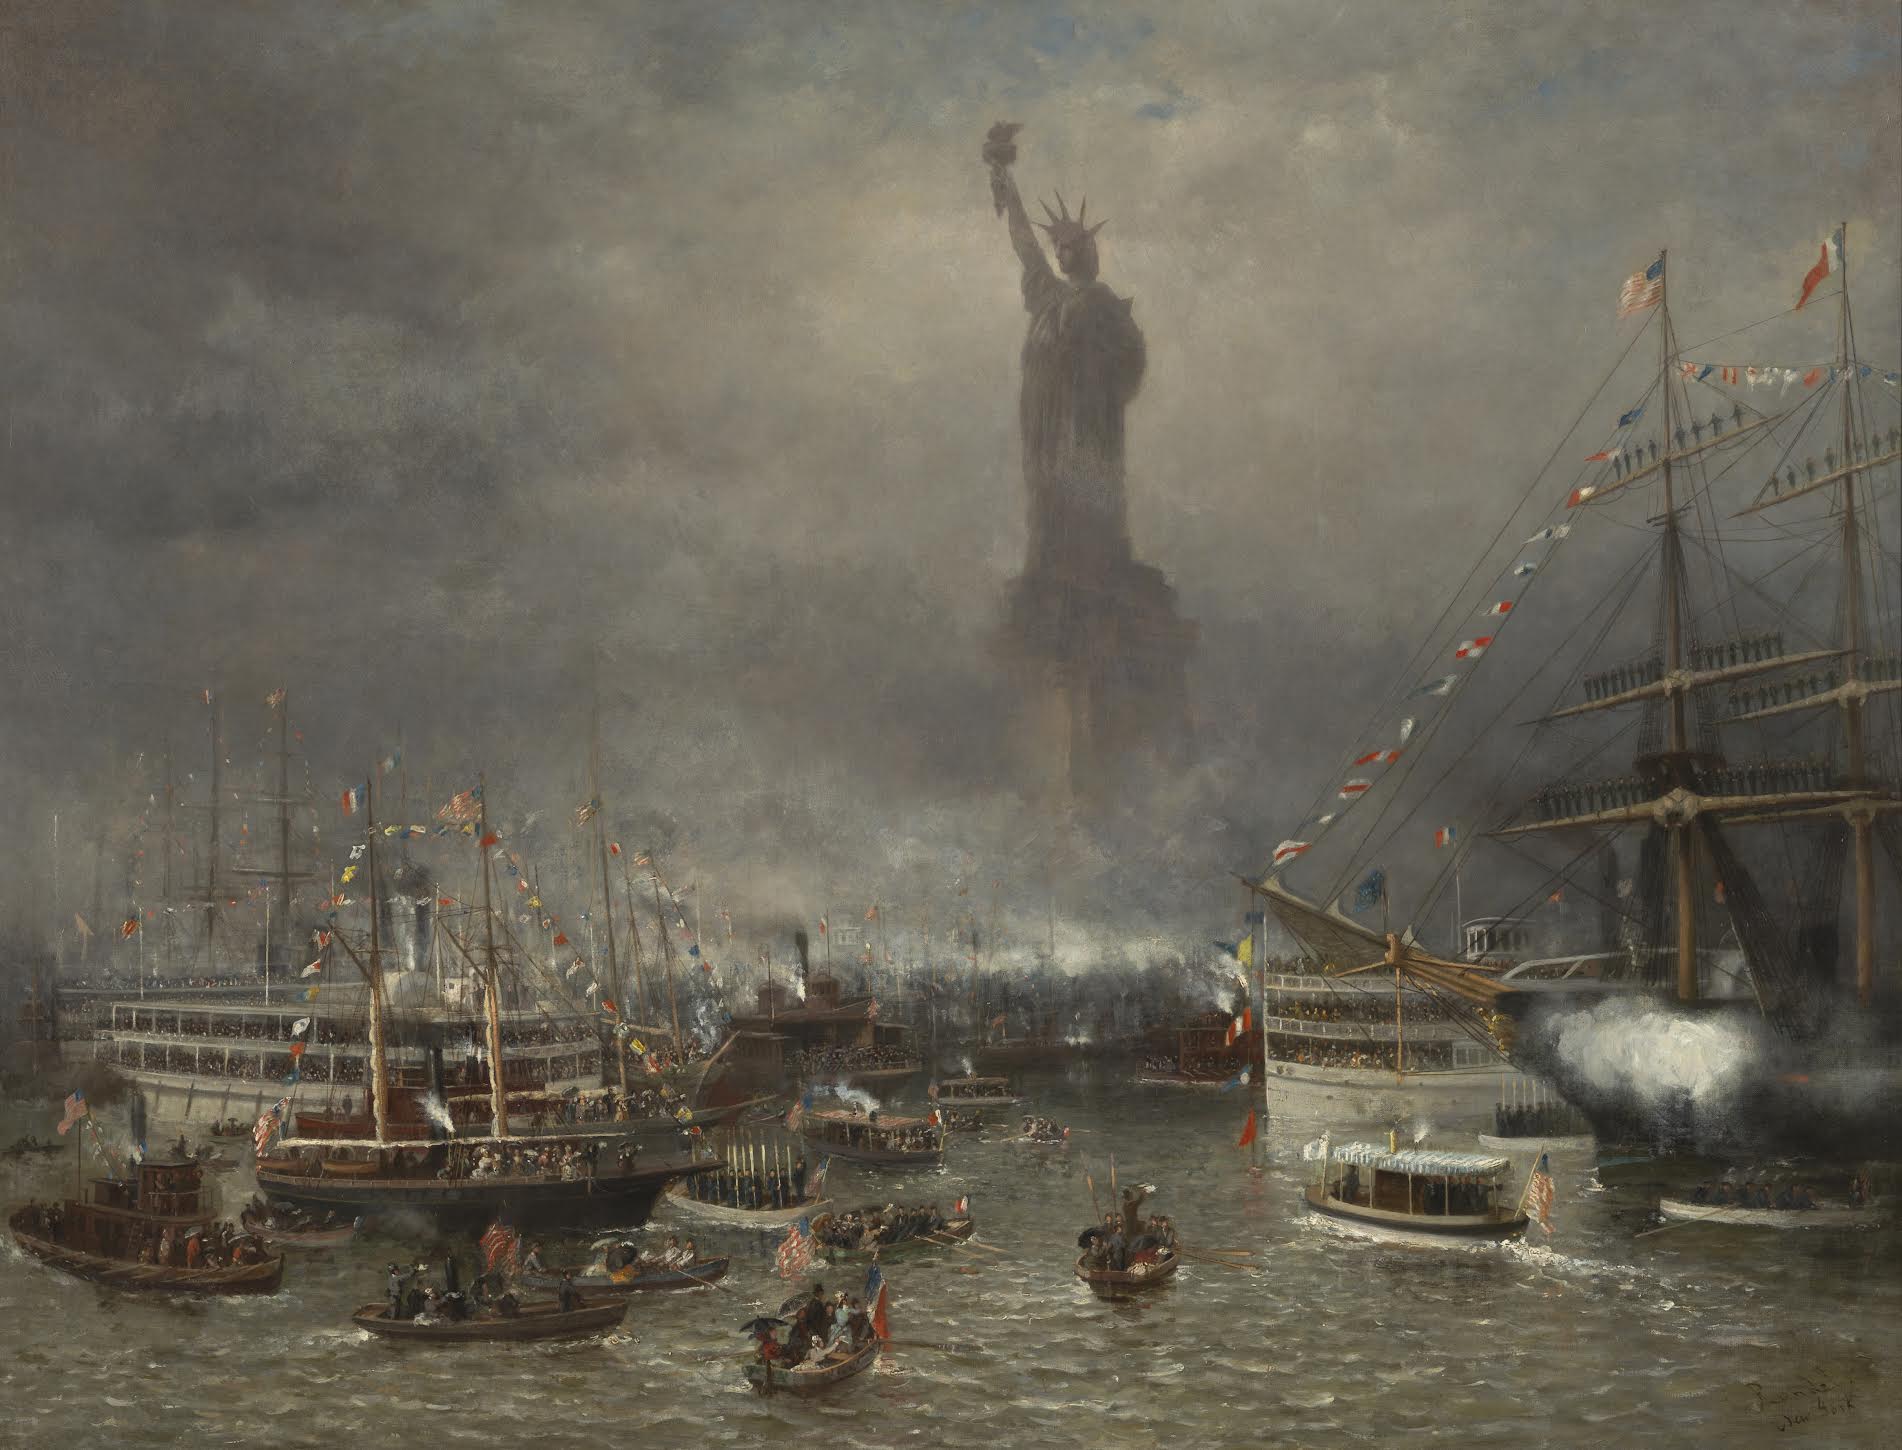 A group of onlookers gather to witness the unveiling of the Statue of Liberty in the New York Harbor. The Statue of Liberty stands triumphantly in the center of the picture with boats surrounding them on a gray day.